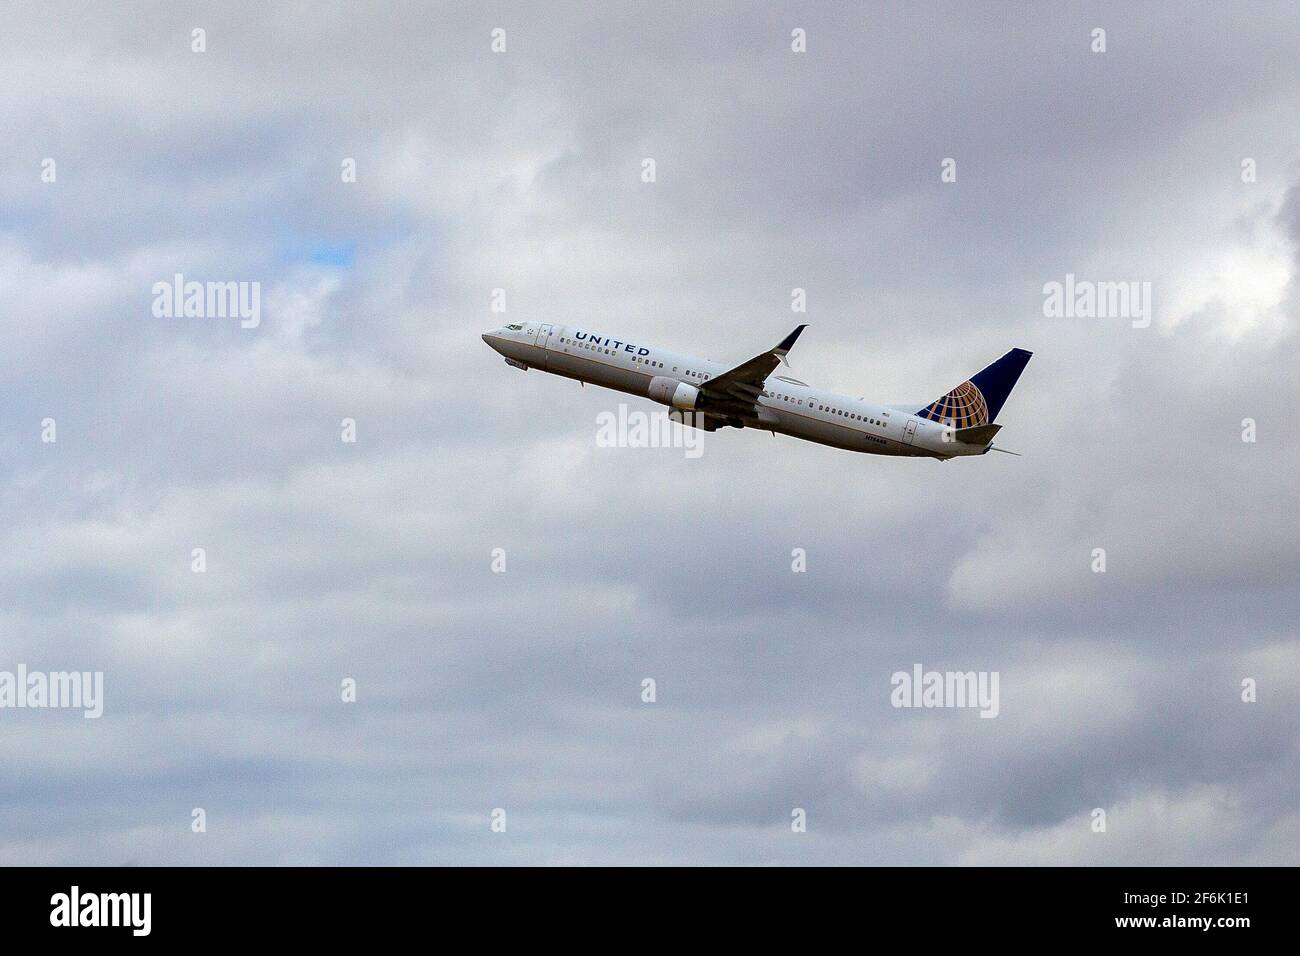 United Airlines plane taking off from Denver International Airport Denver Colorado. DIA Stock Photo